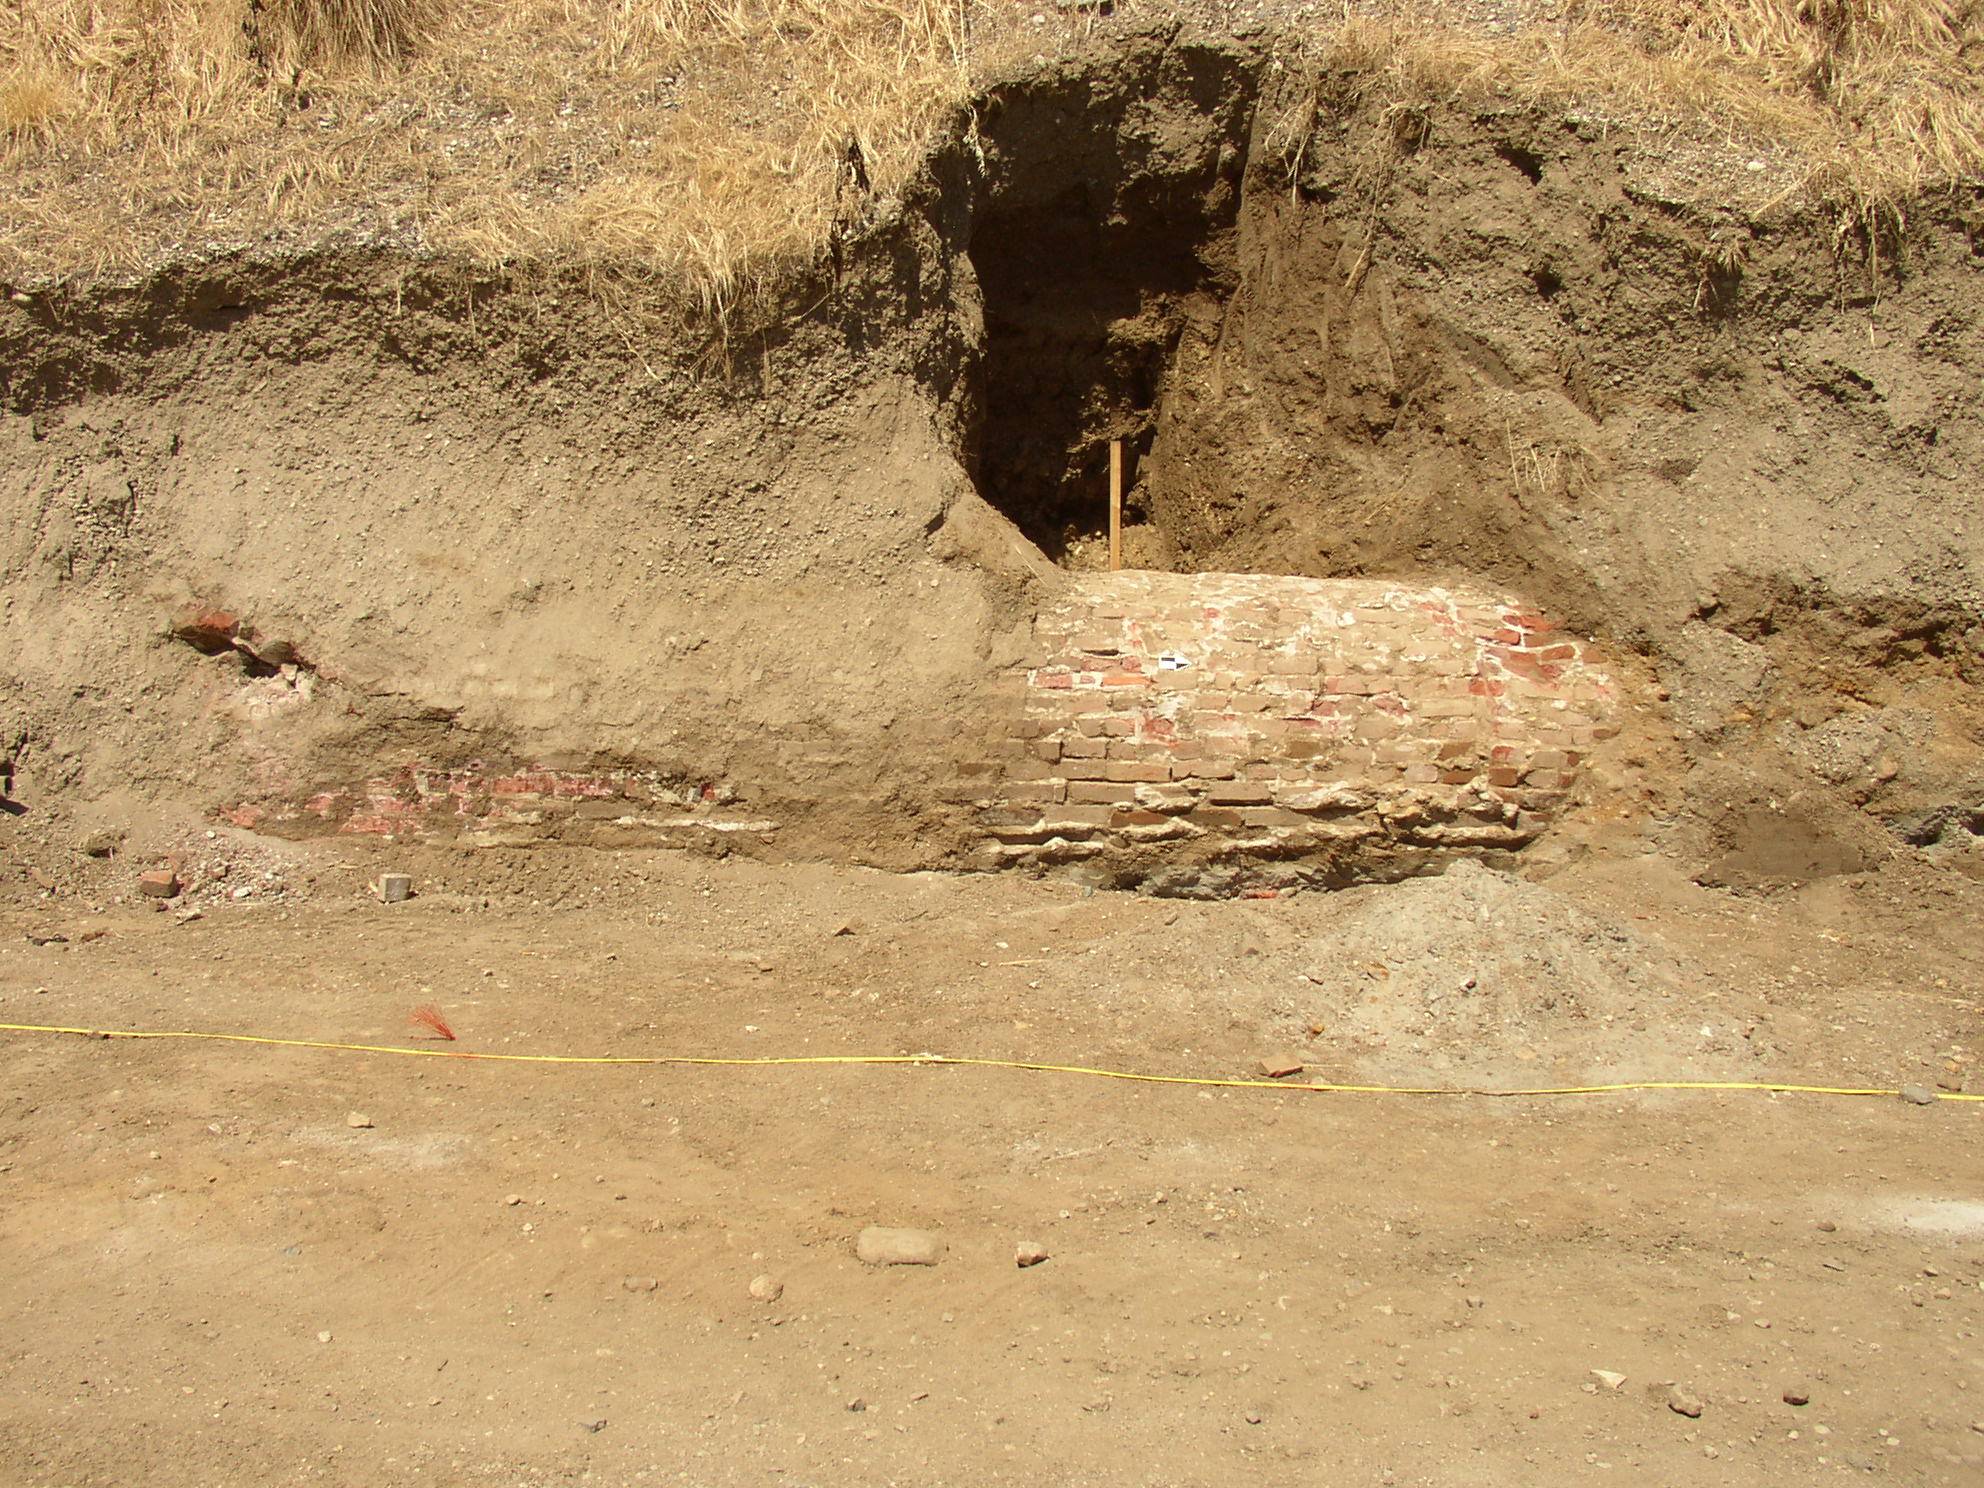 An marked-off archeological work site within a dry mound of soil.